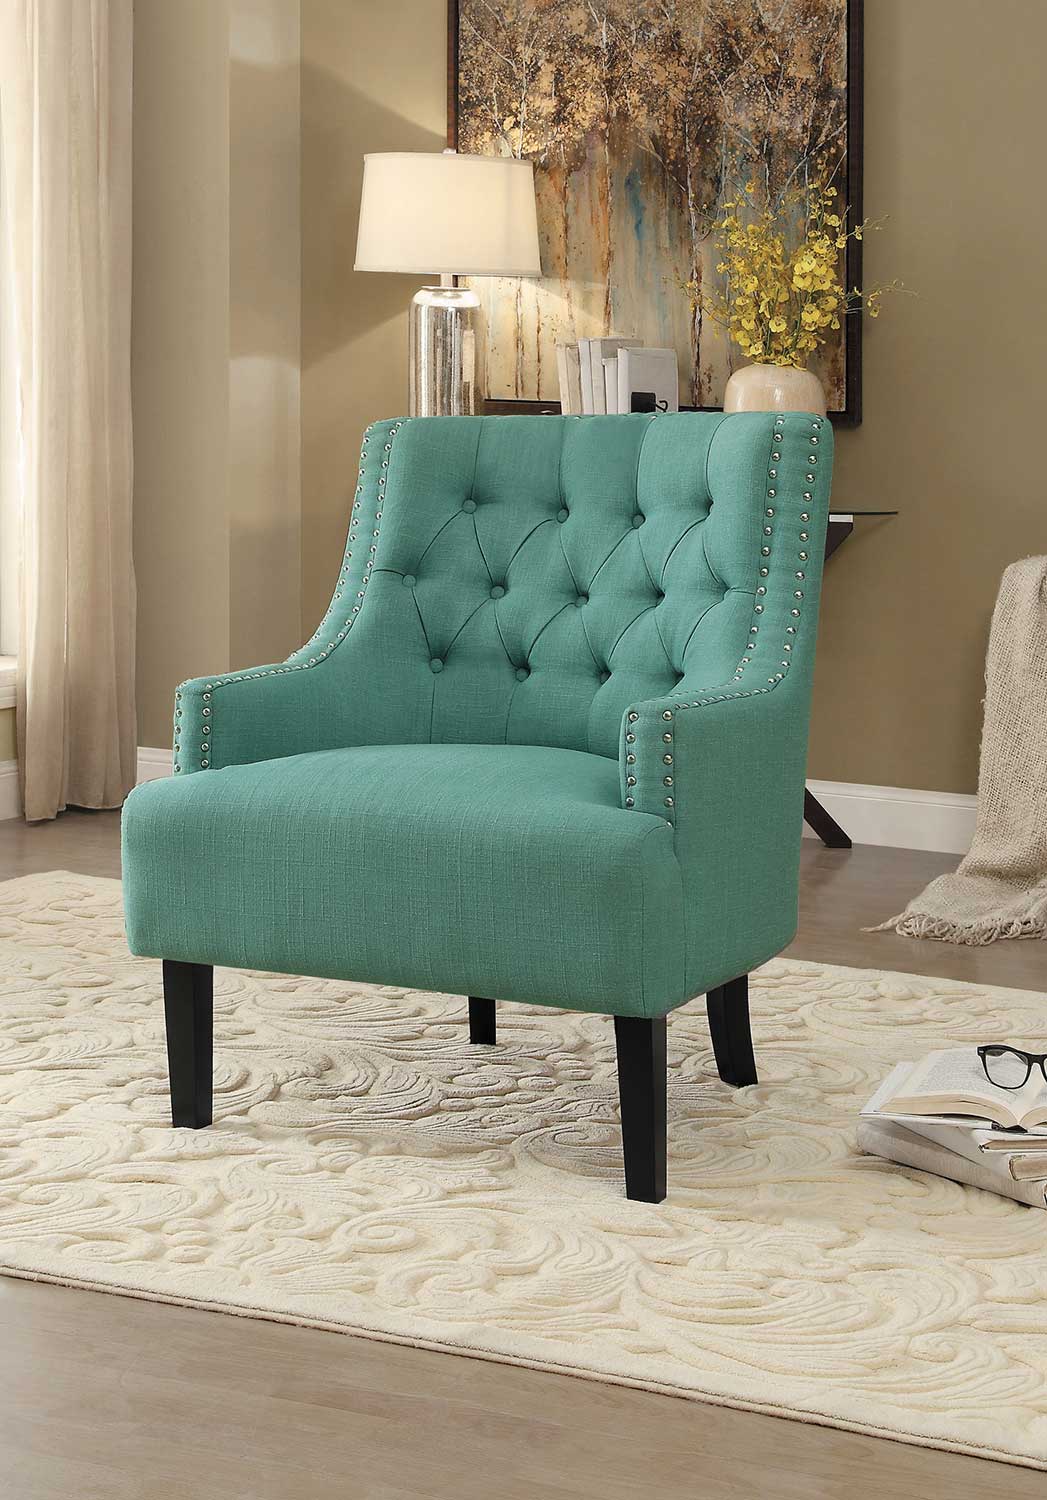 Homelegance Charisma Accent Chair - Teal